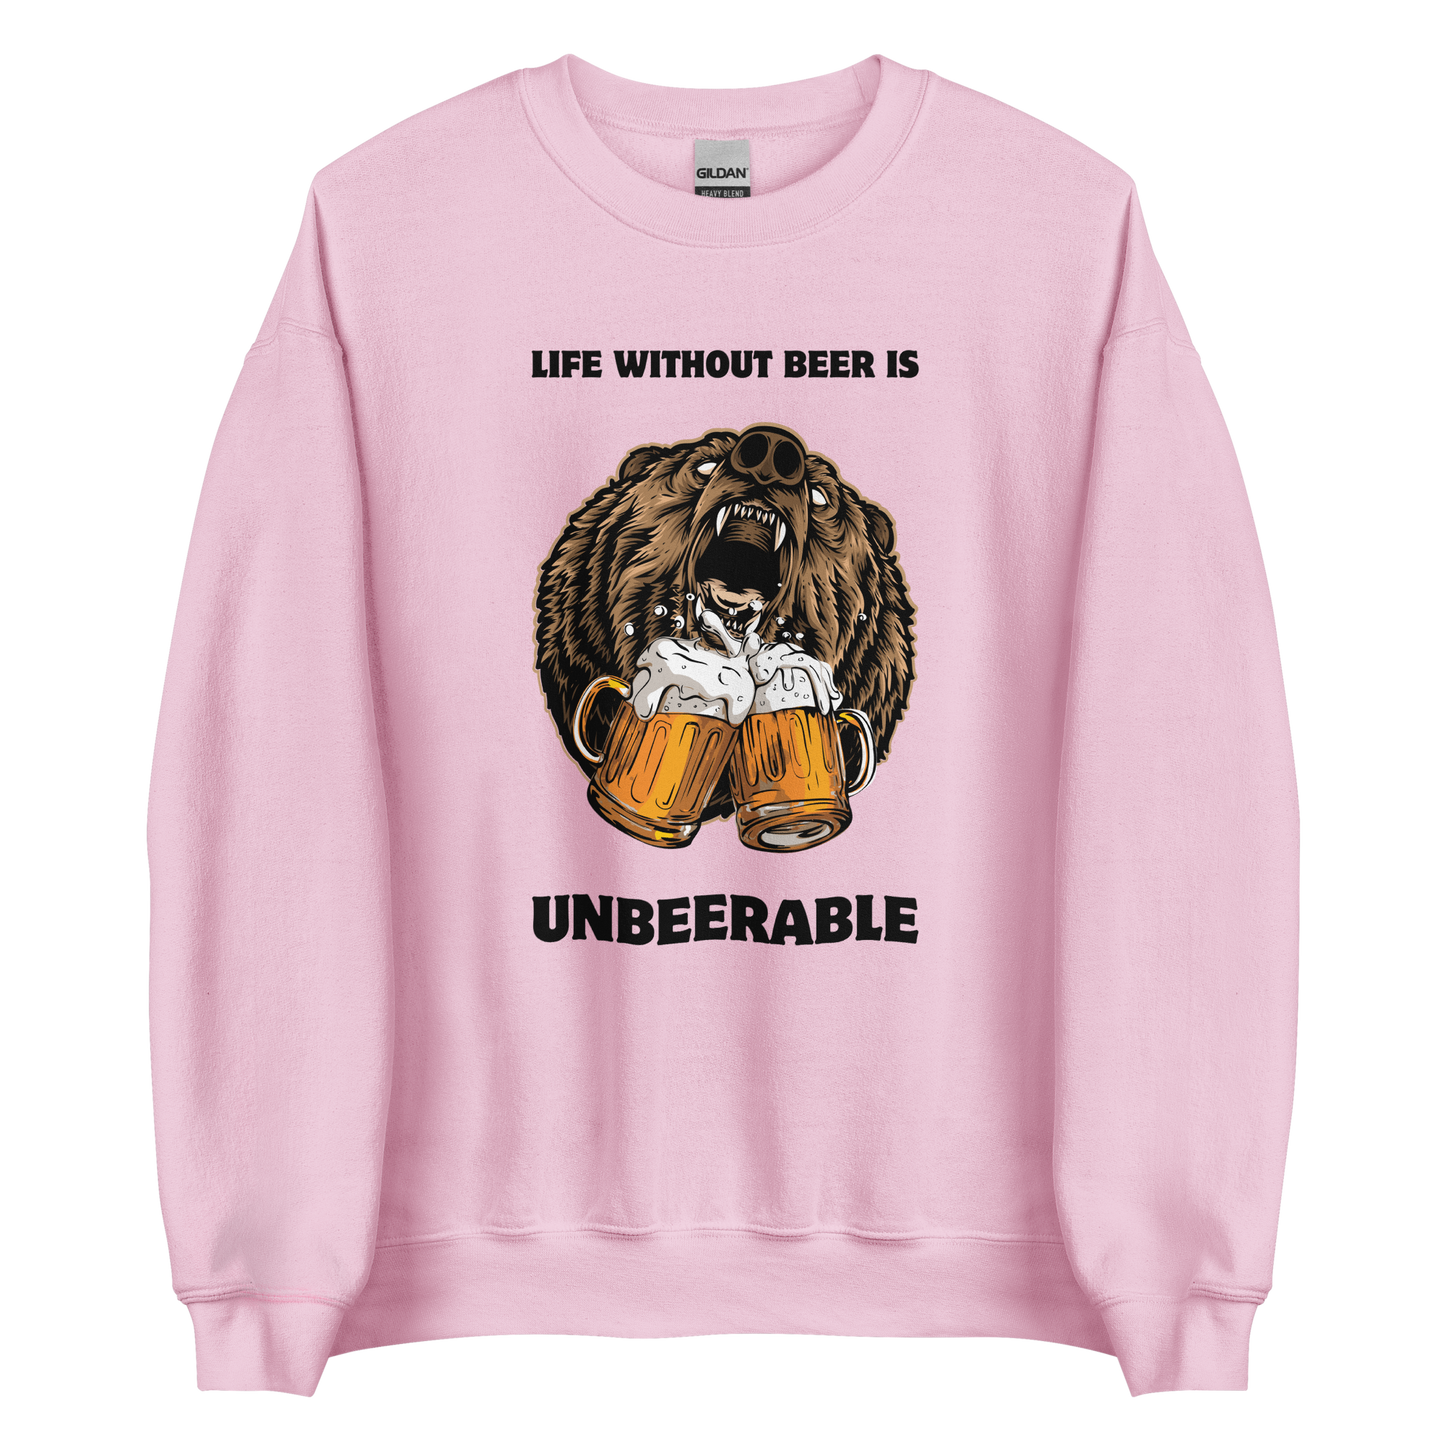 Light Pink Bear Sweatshirt featuring a Life Without Beer Is Unbeerable graphic on the chest - Funny Graphic Bear Sweatshirts - Boozy Fox